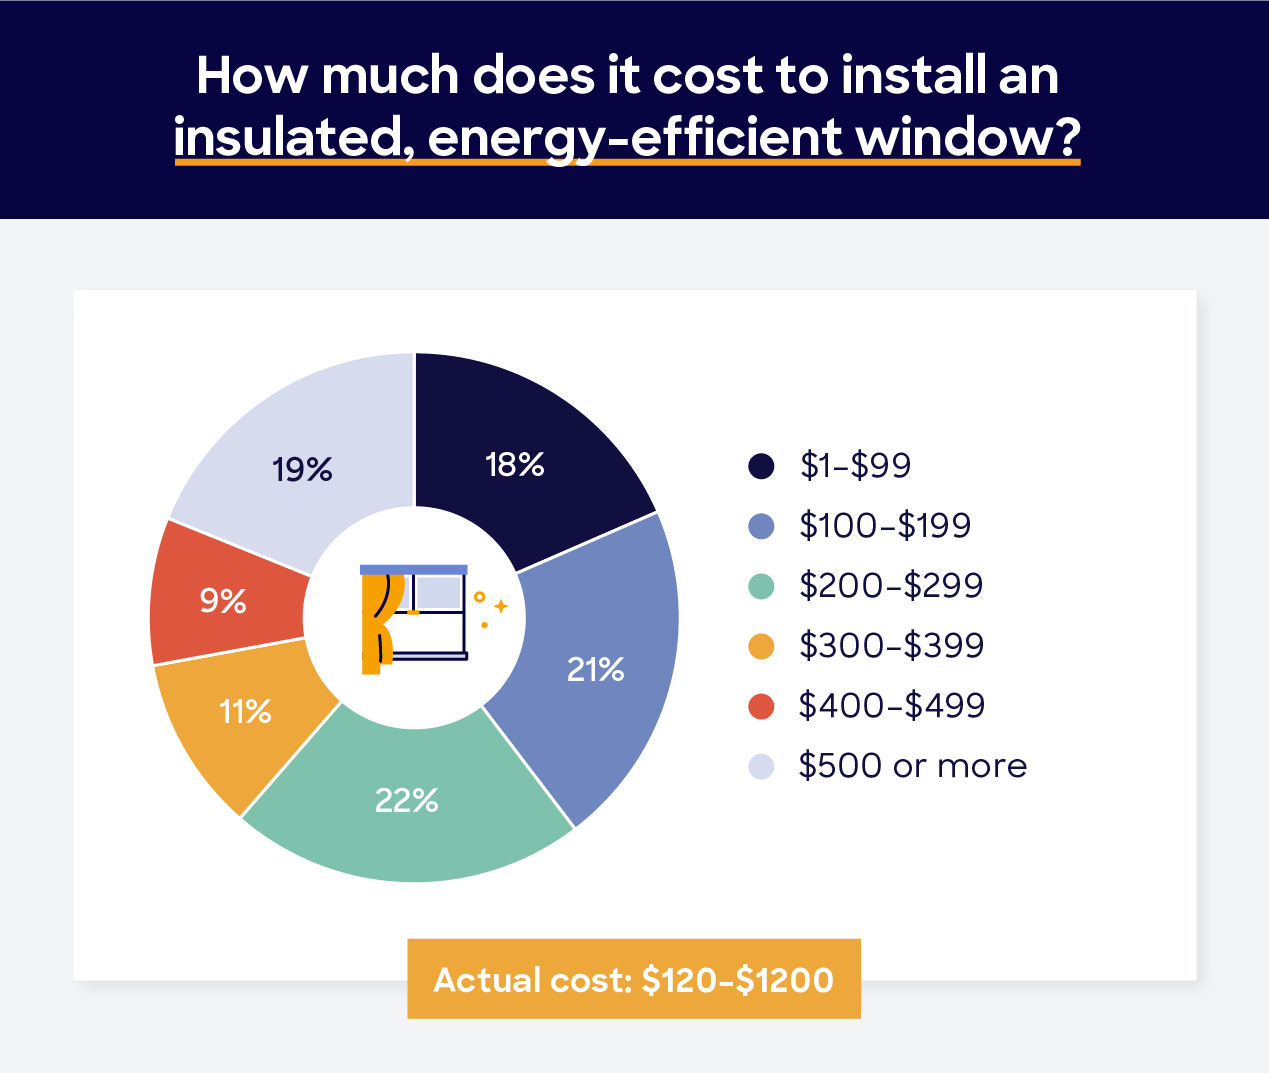 It costs about $120-$1,200 to install an insulated, energy-efficient window. 